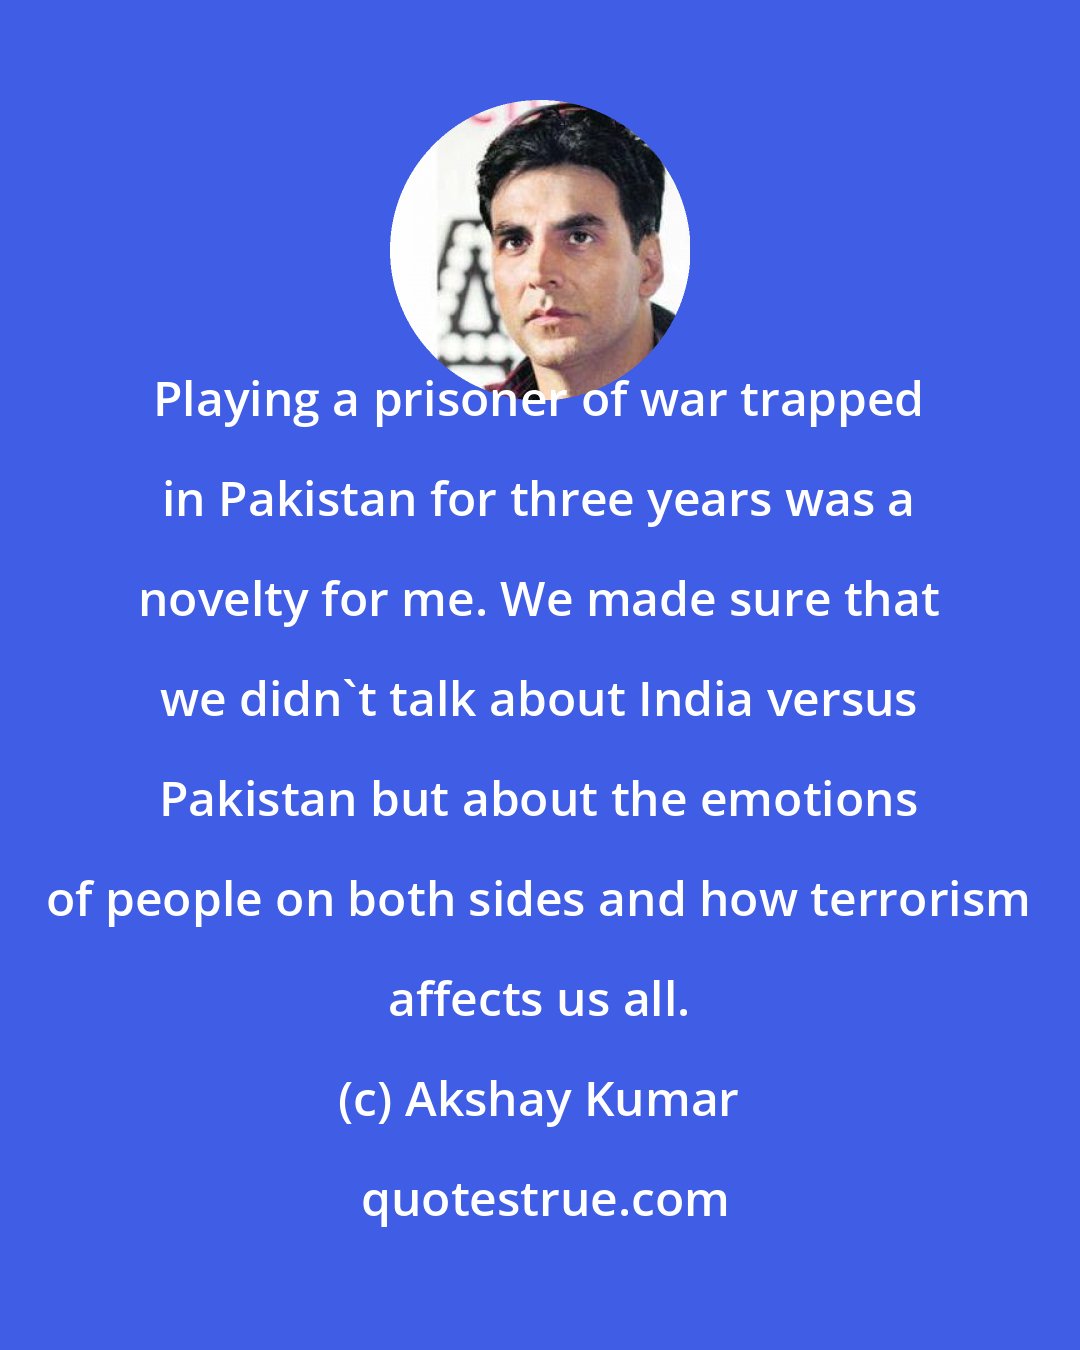 Akshay Kumar: Playing a prisoner of war trapped in Pakistan for three years was a novelty for me. We made sure that we didn't talk about India versus Pakistan but about the emotions of people on both sides and how terrorism affects us all.